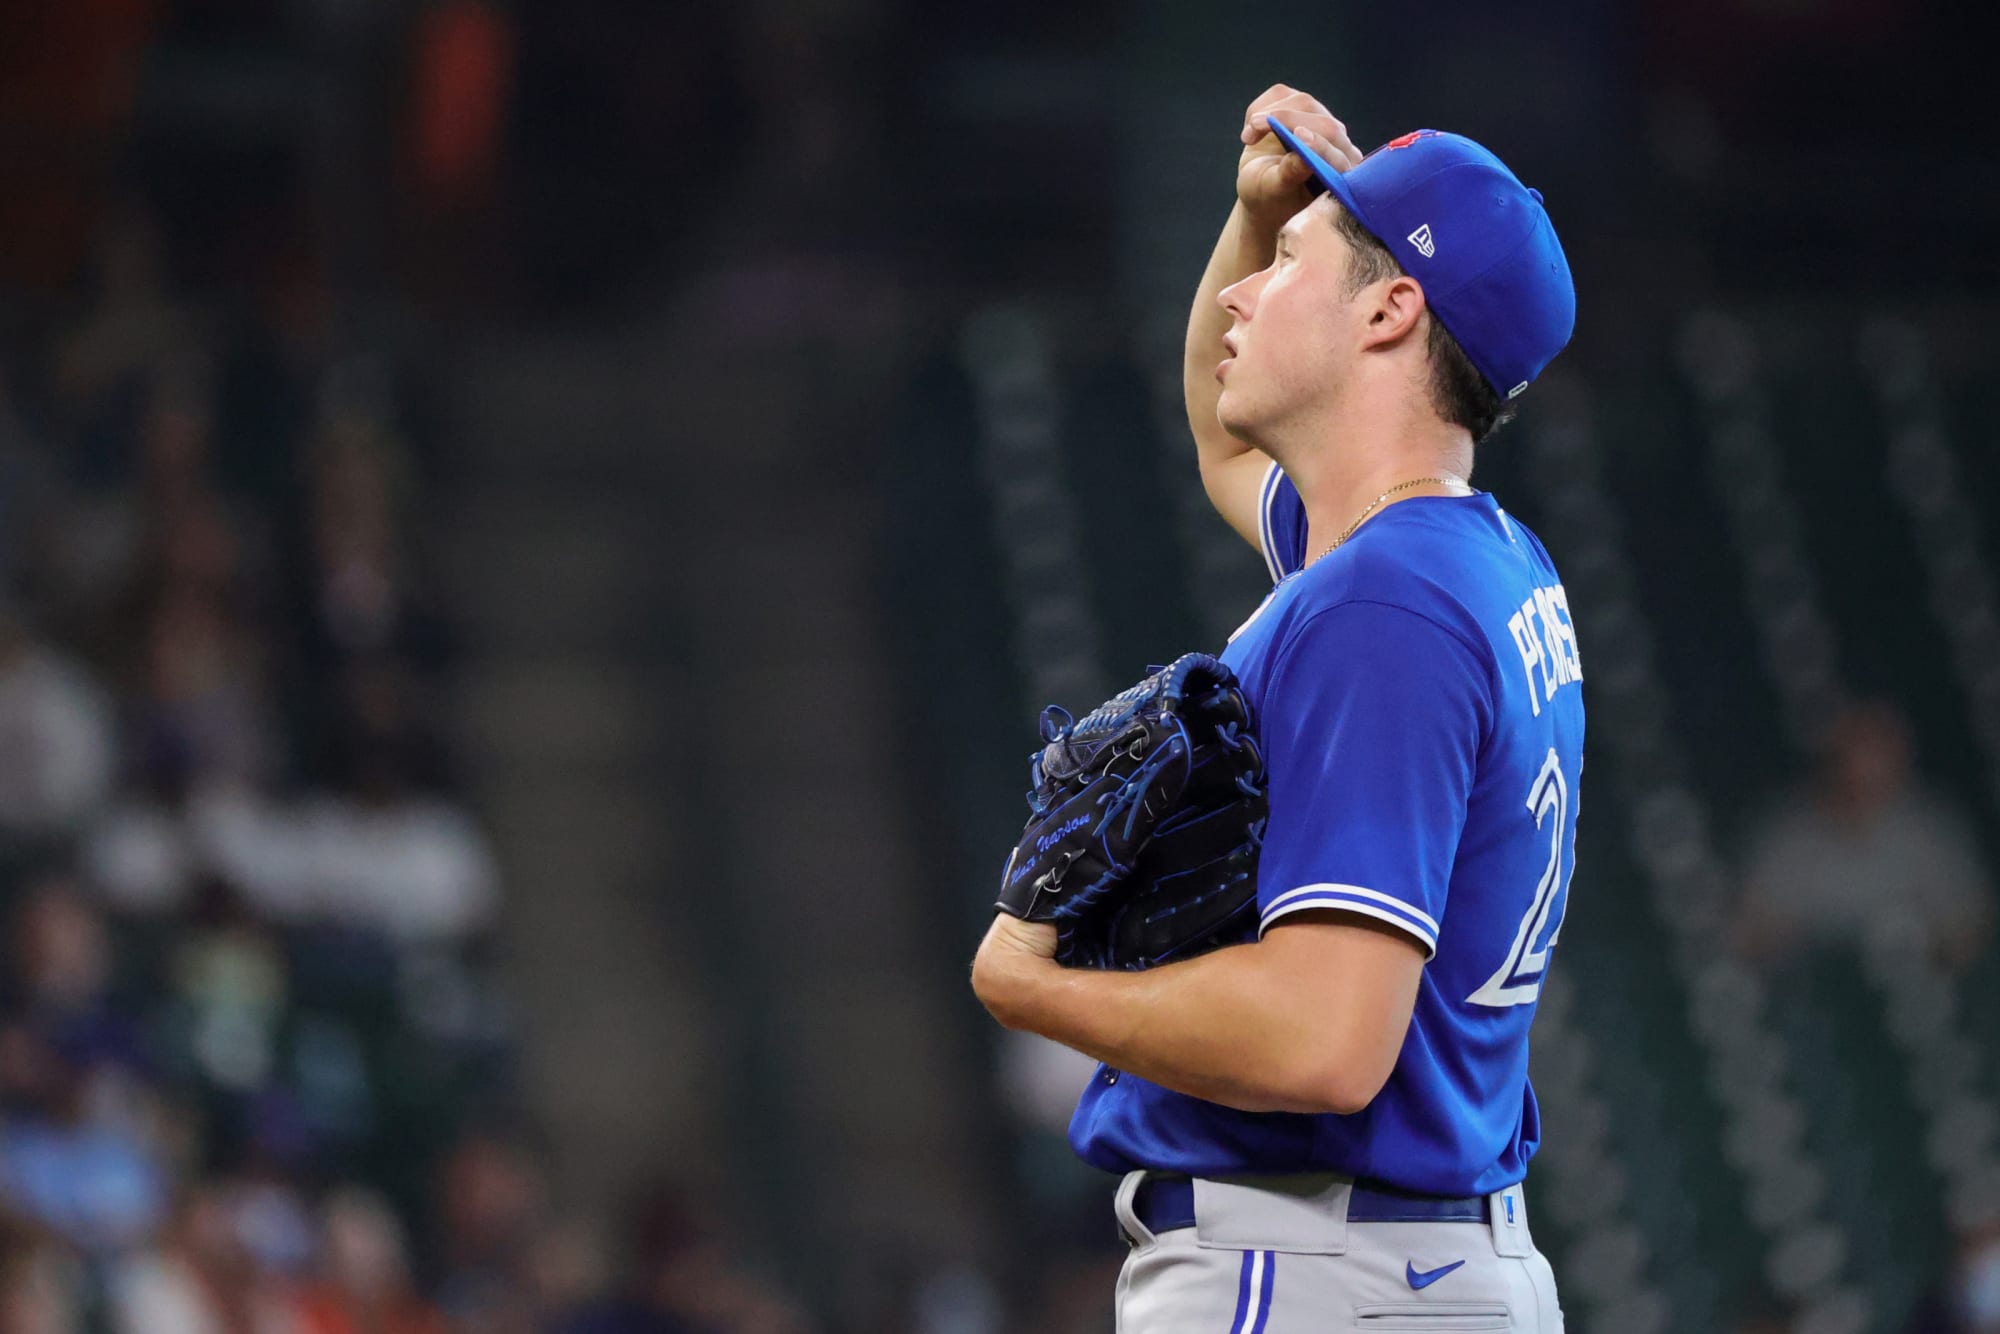 Why the Blue Jays still believe Nate Pearson can be a star